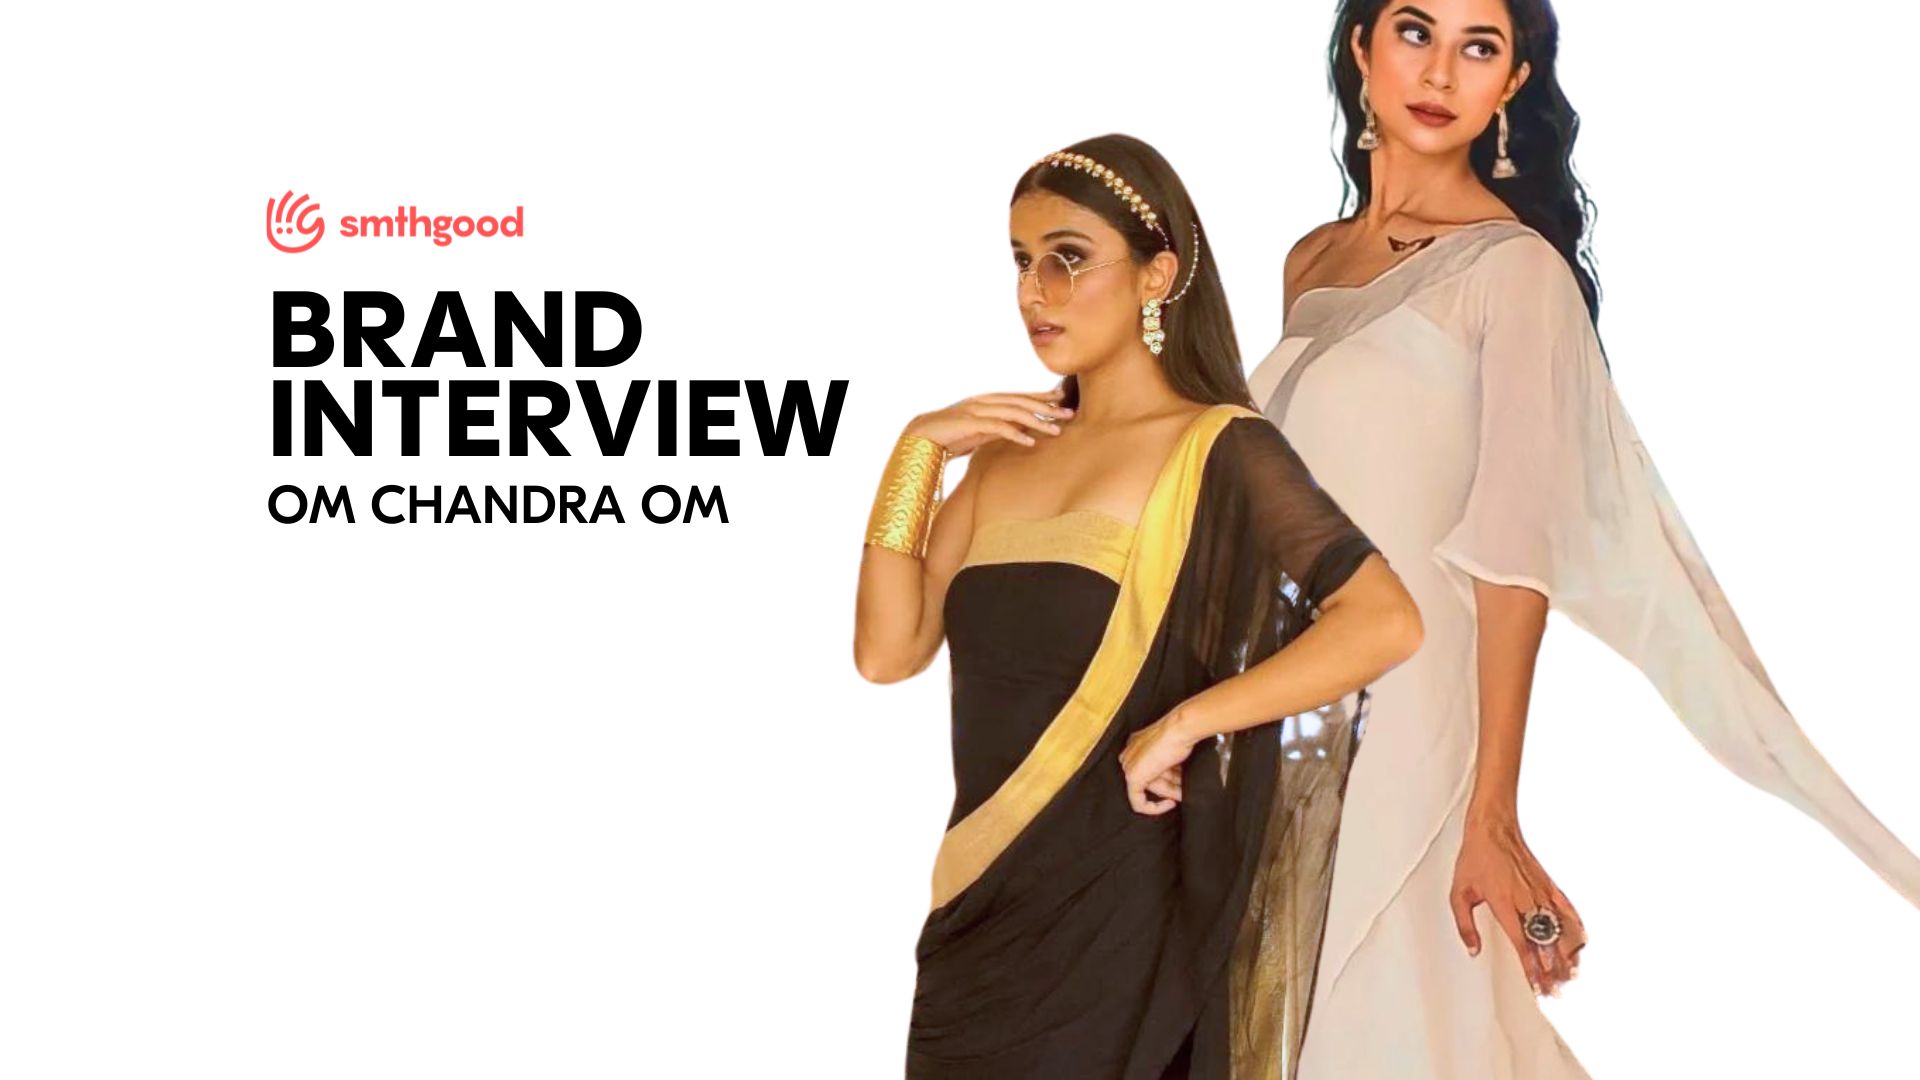 Exclusive Interview With Brand: Om Chandra Om